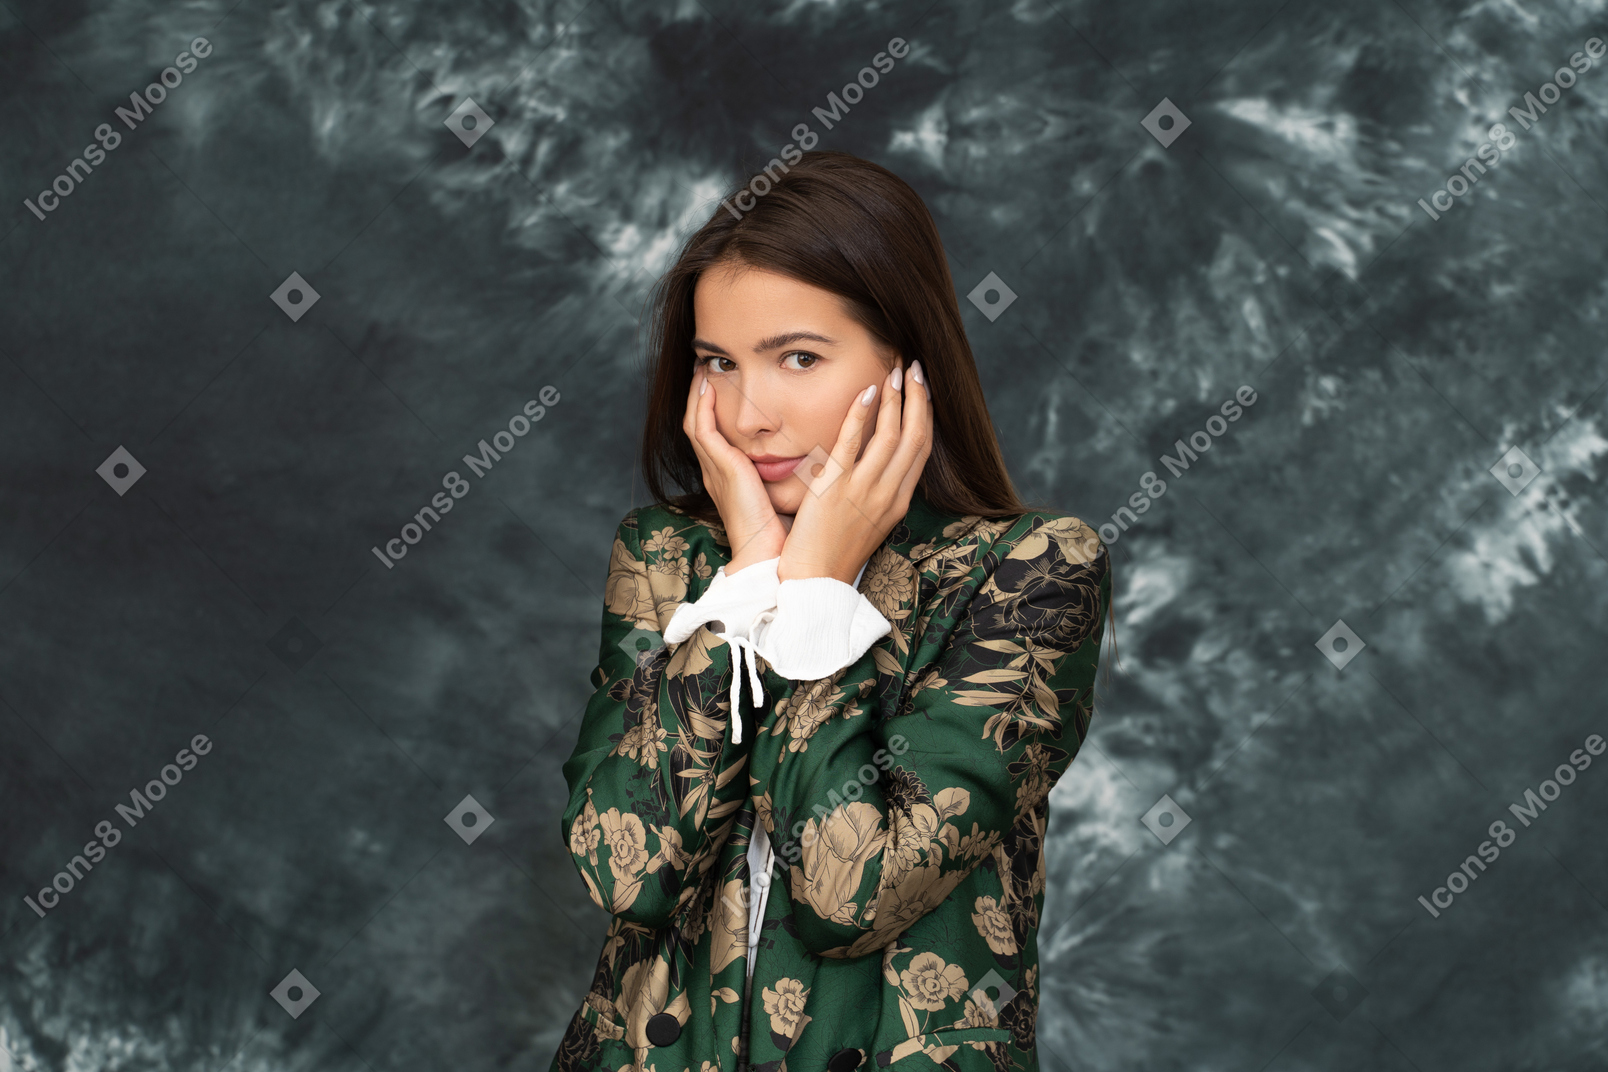 A doubtful woman in silk japanese jacket touching face with both her hands looks at camera